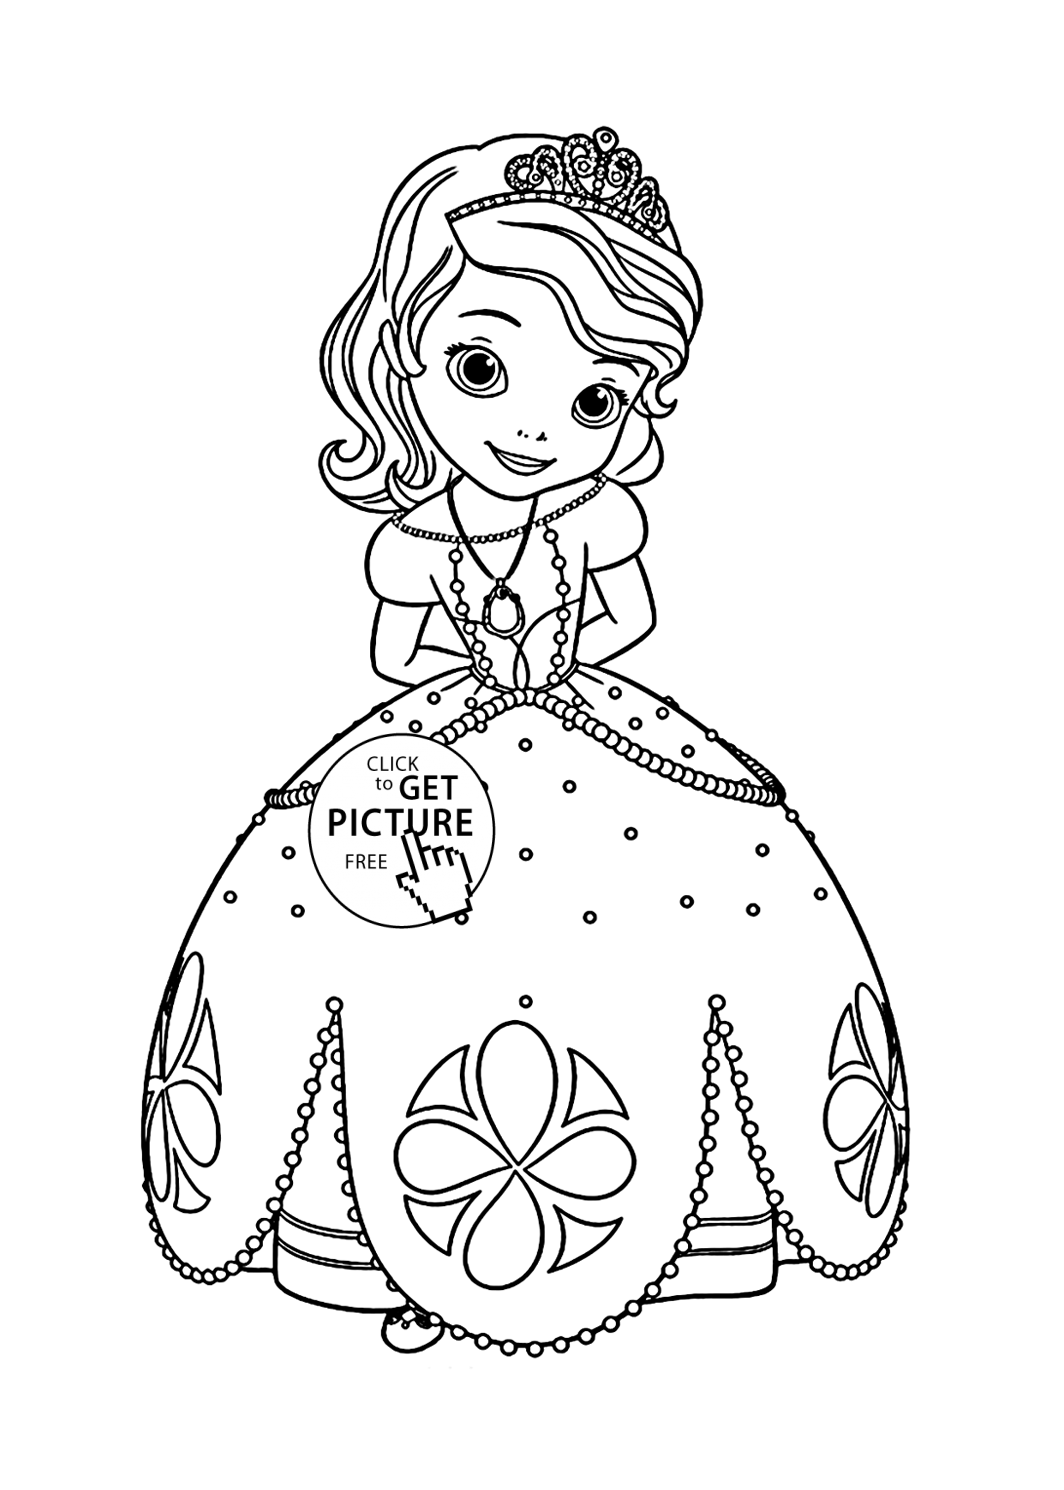 Cartoon Simple Princess Coloring Pages for Adult